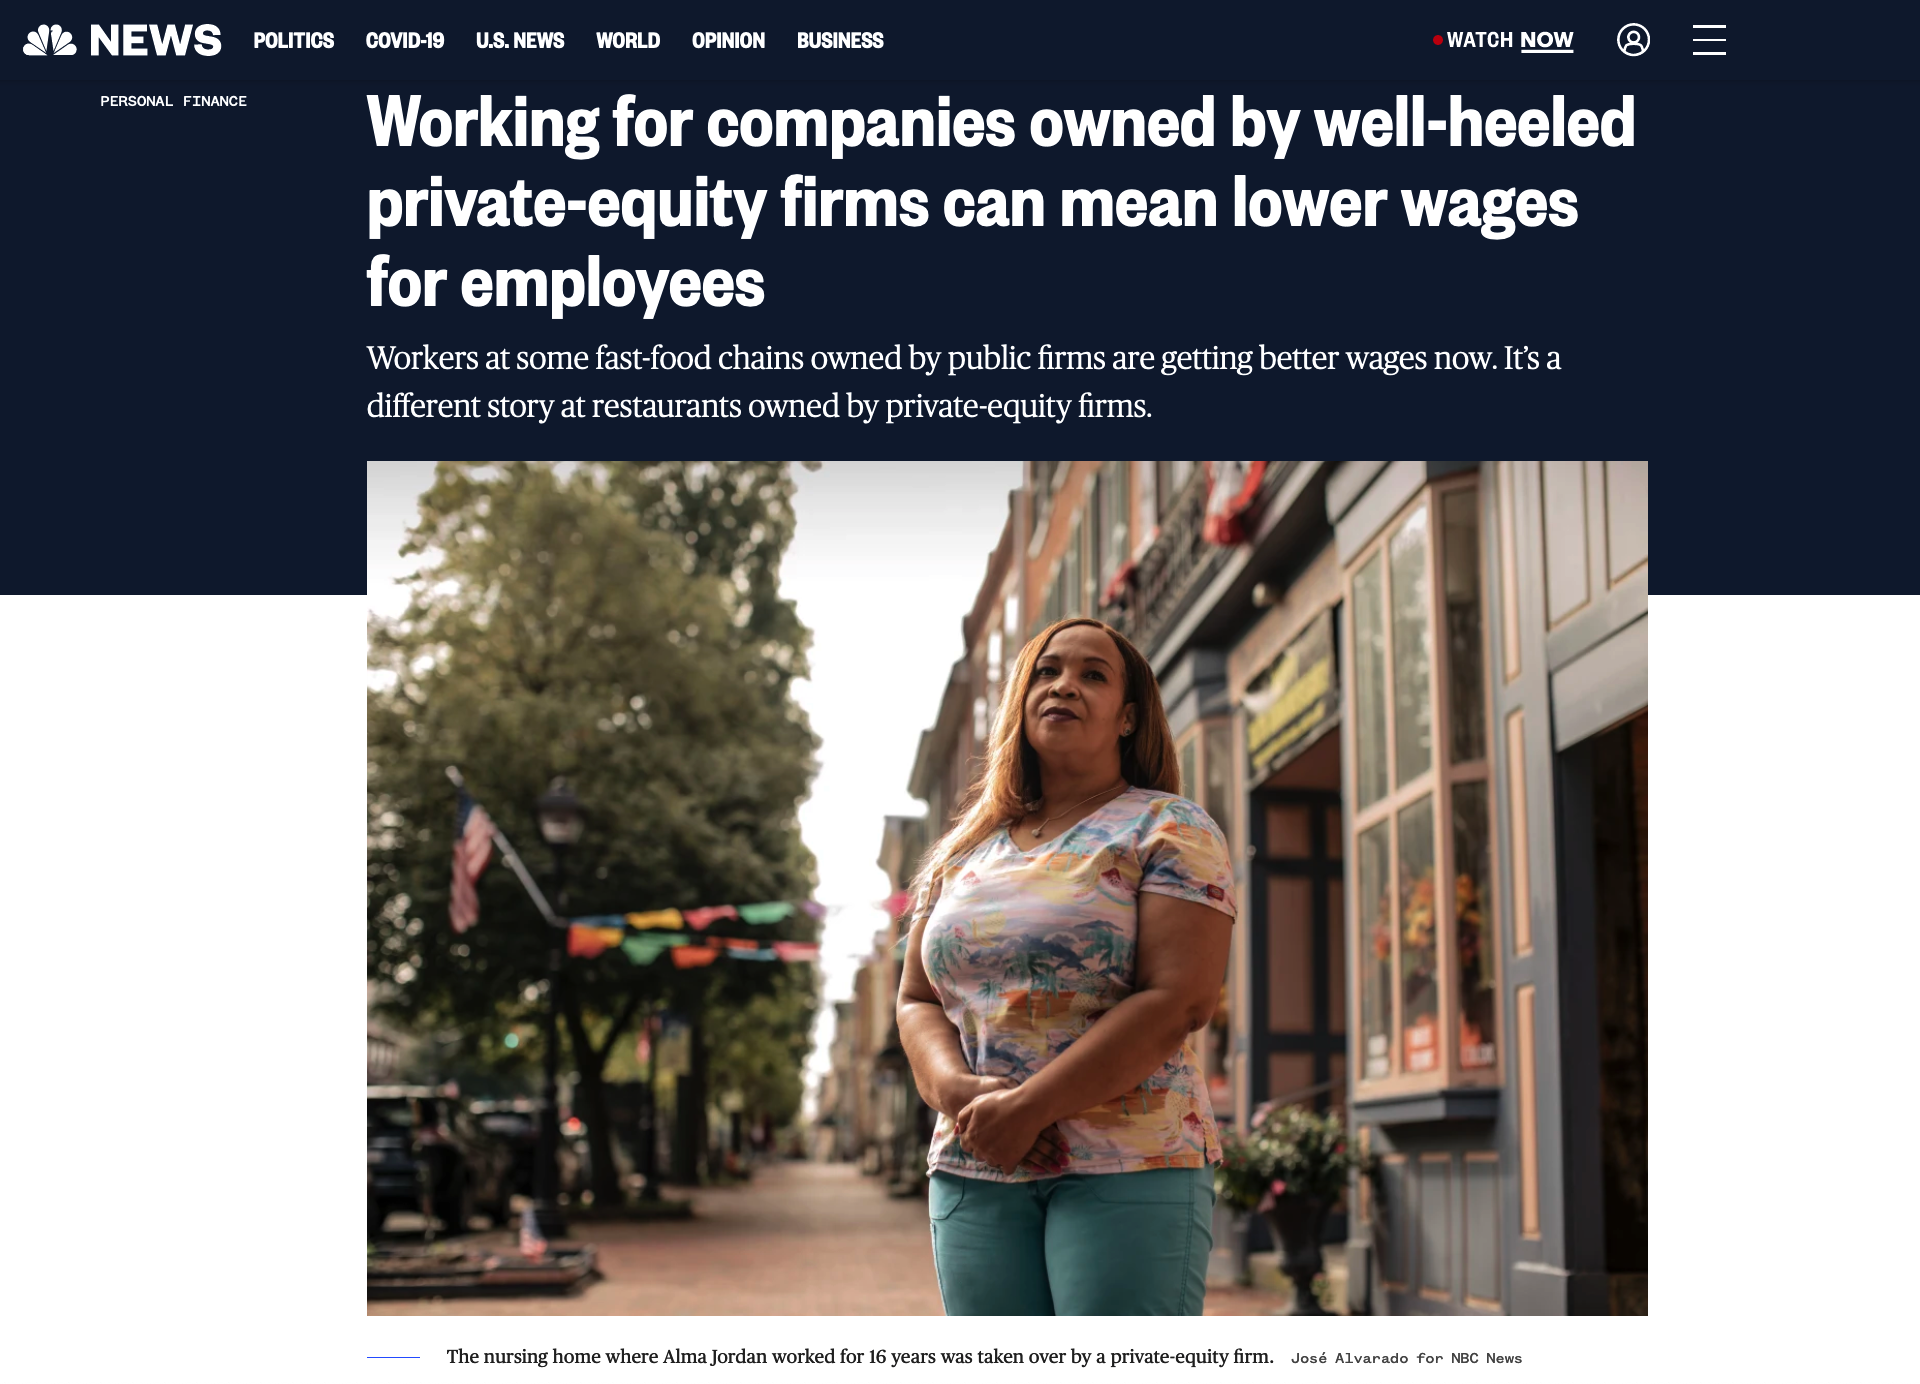 for NBC News: Working for companies owned by well-heeled private-equity firms can mean lower wages for employees